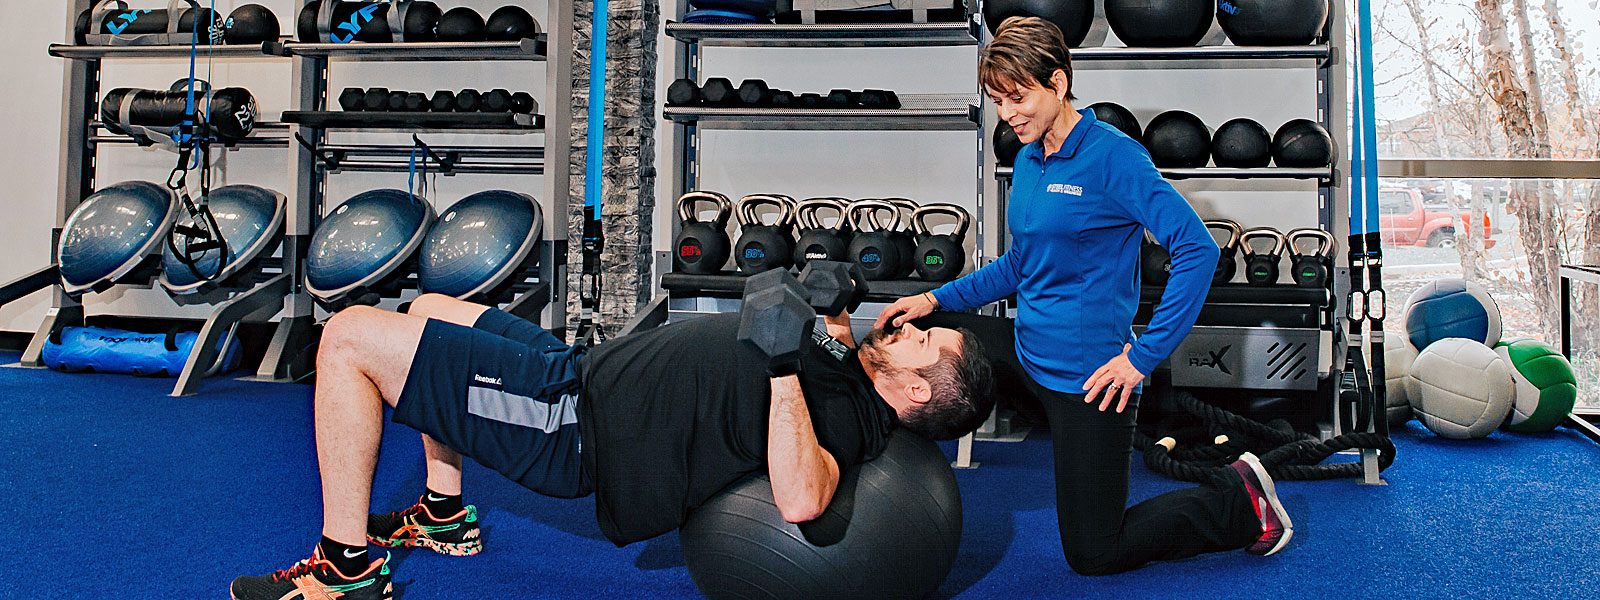 Man lifting weights with a yoga ball working out with a personal trainer.